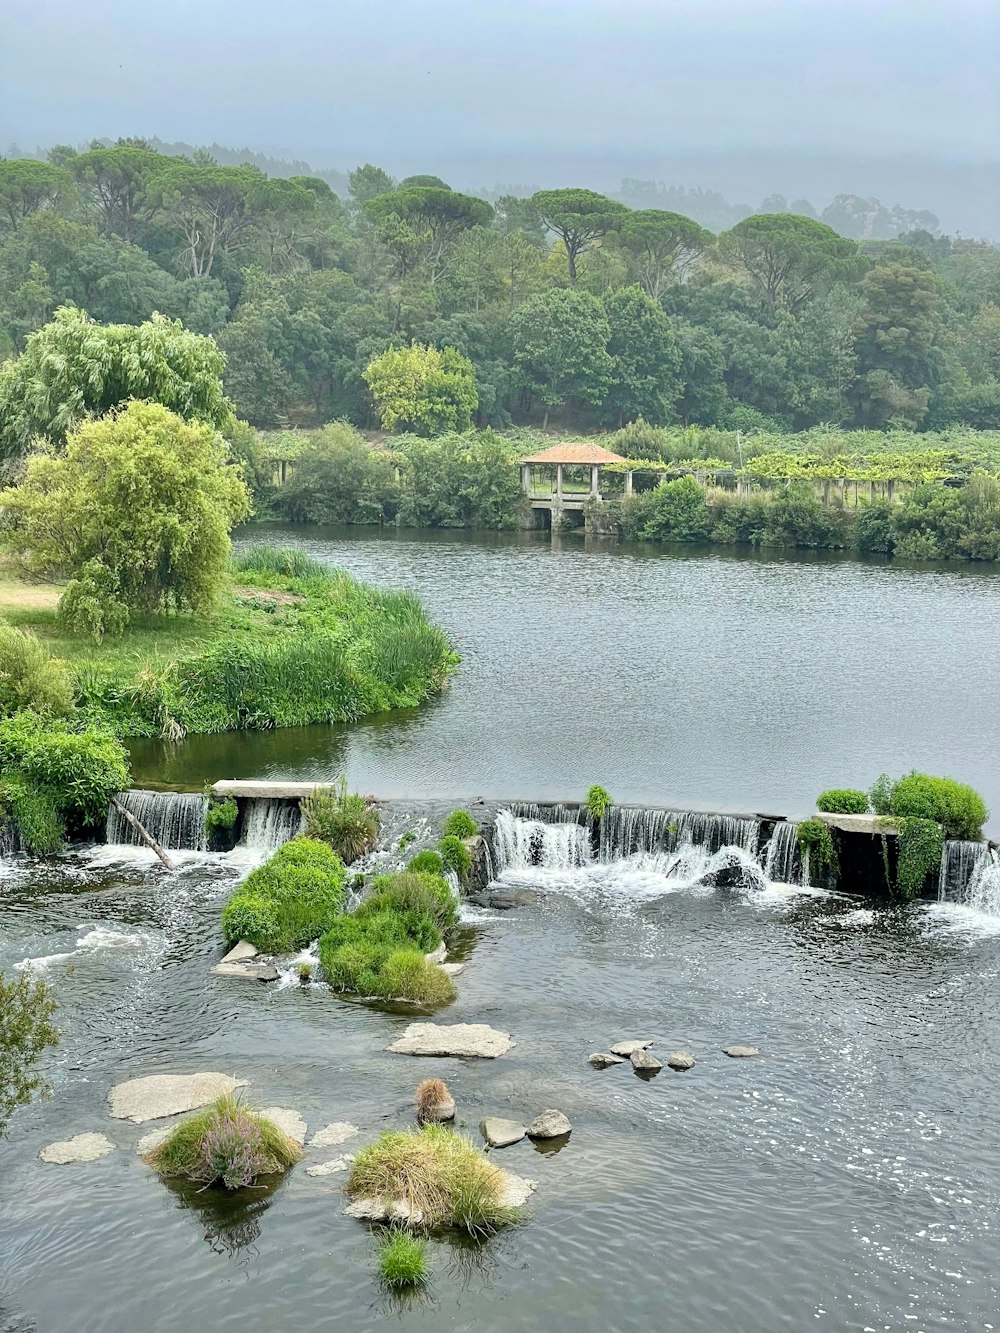 a large body of water surrounded by lush green trees